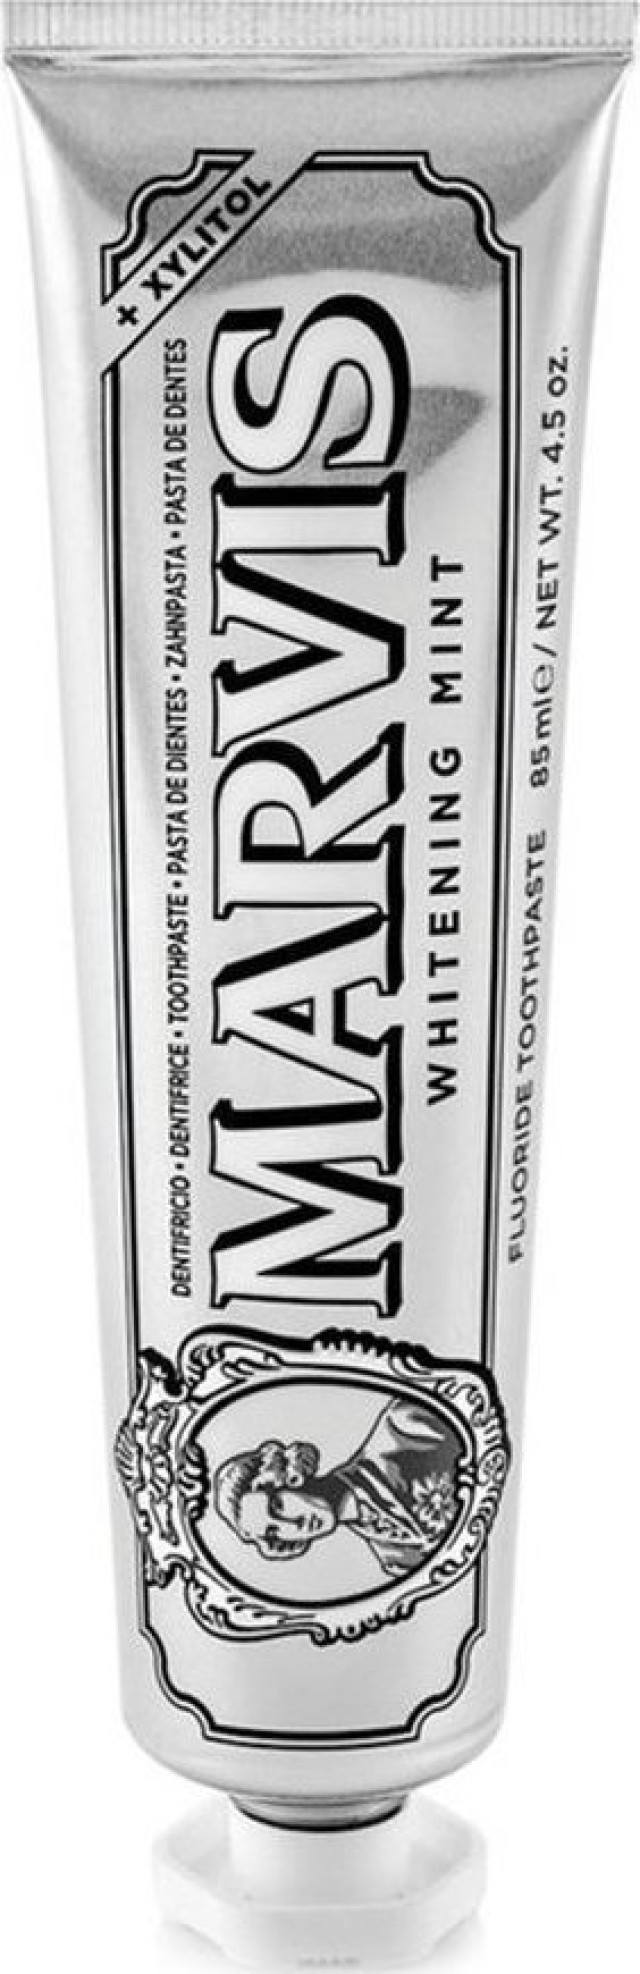 Marvis Whitening Mint Toothpaste With Xylitol Οδοντόκρεμα Λεύκανσης Με Μέντα Και Ξυλιτόλη 85ml